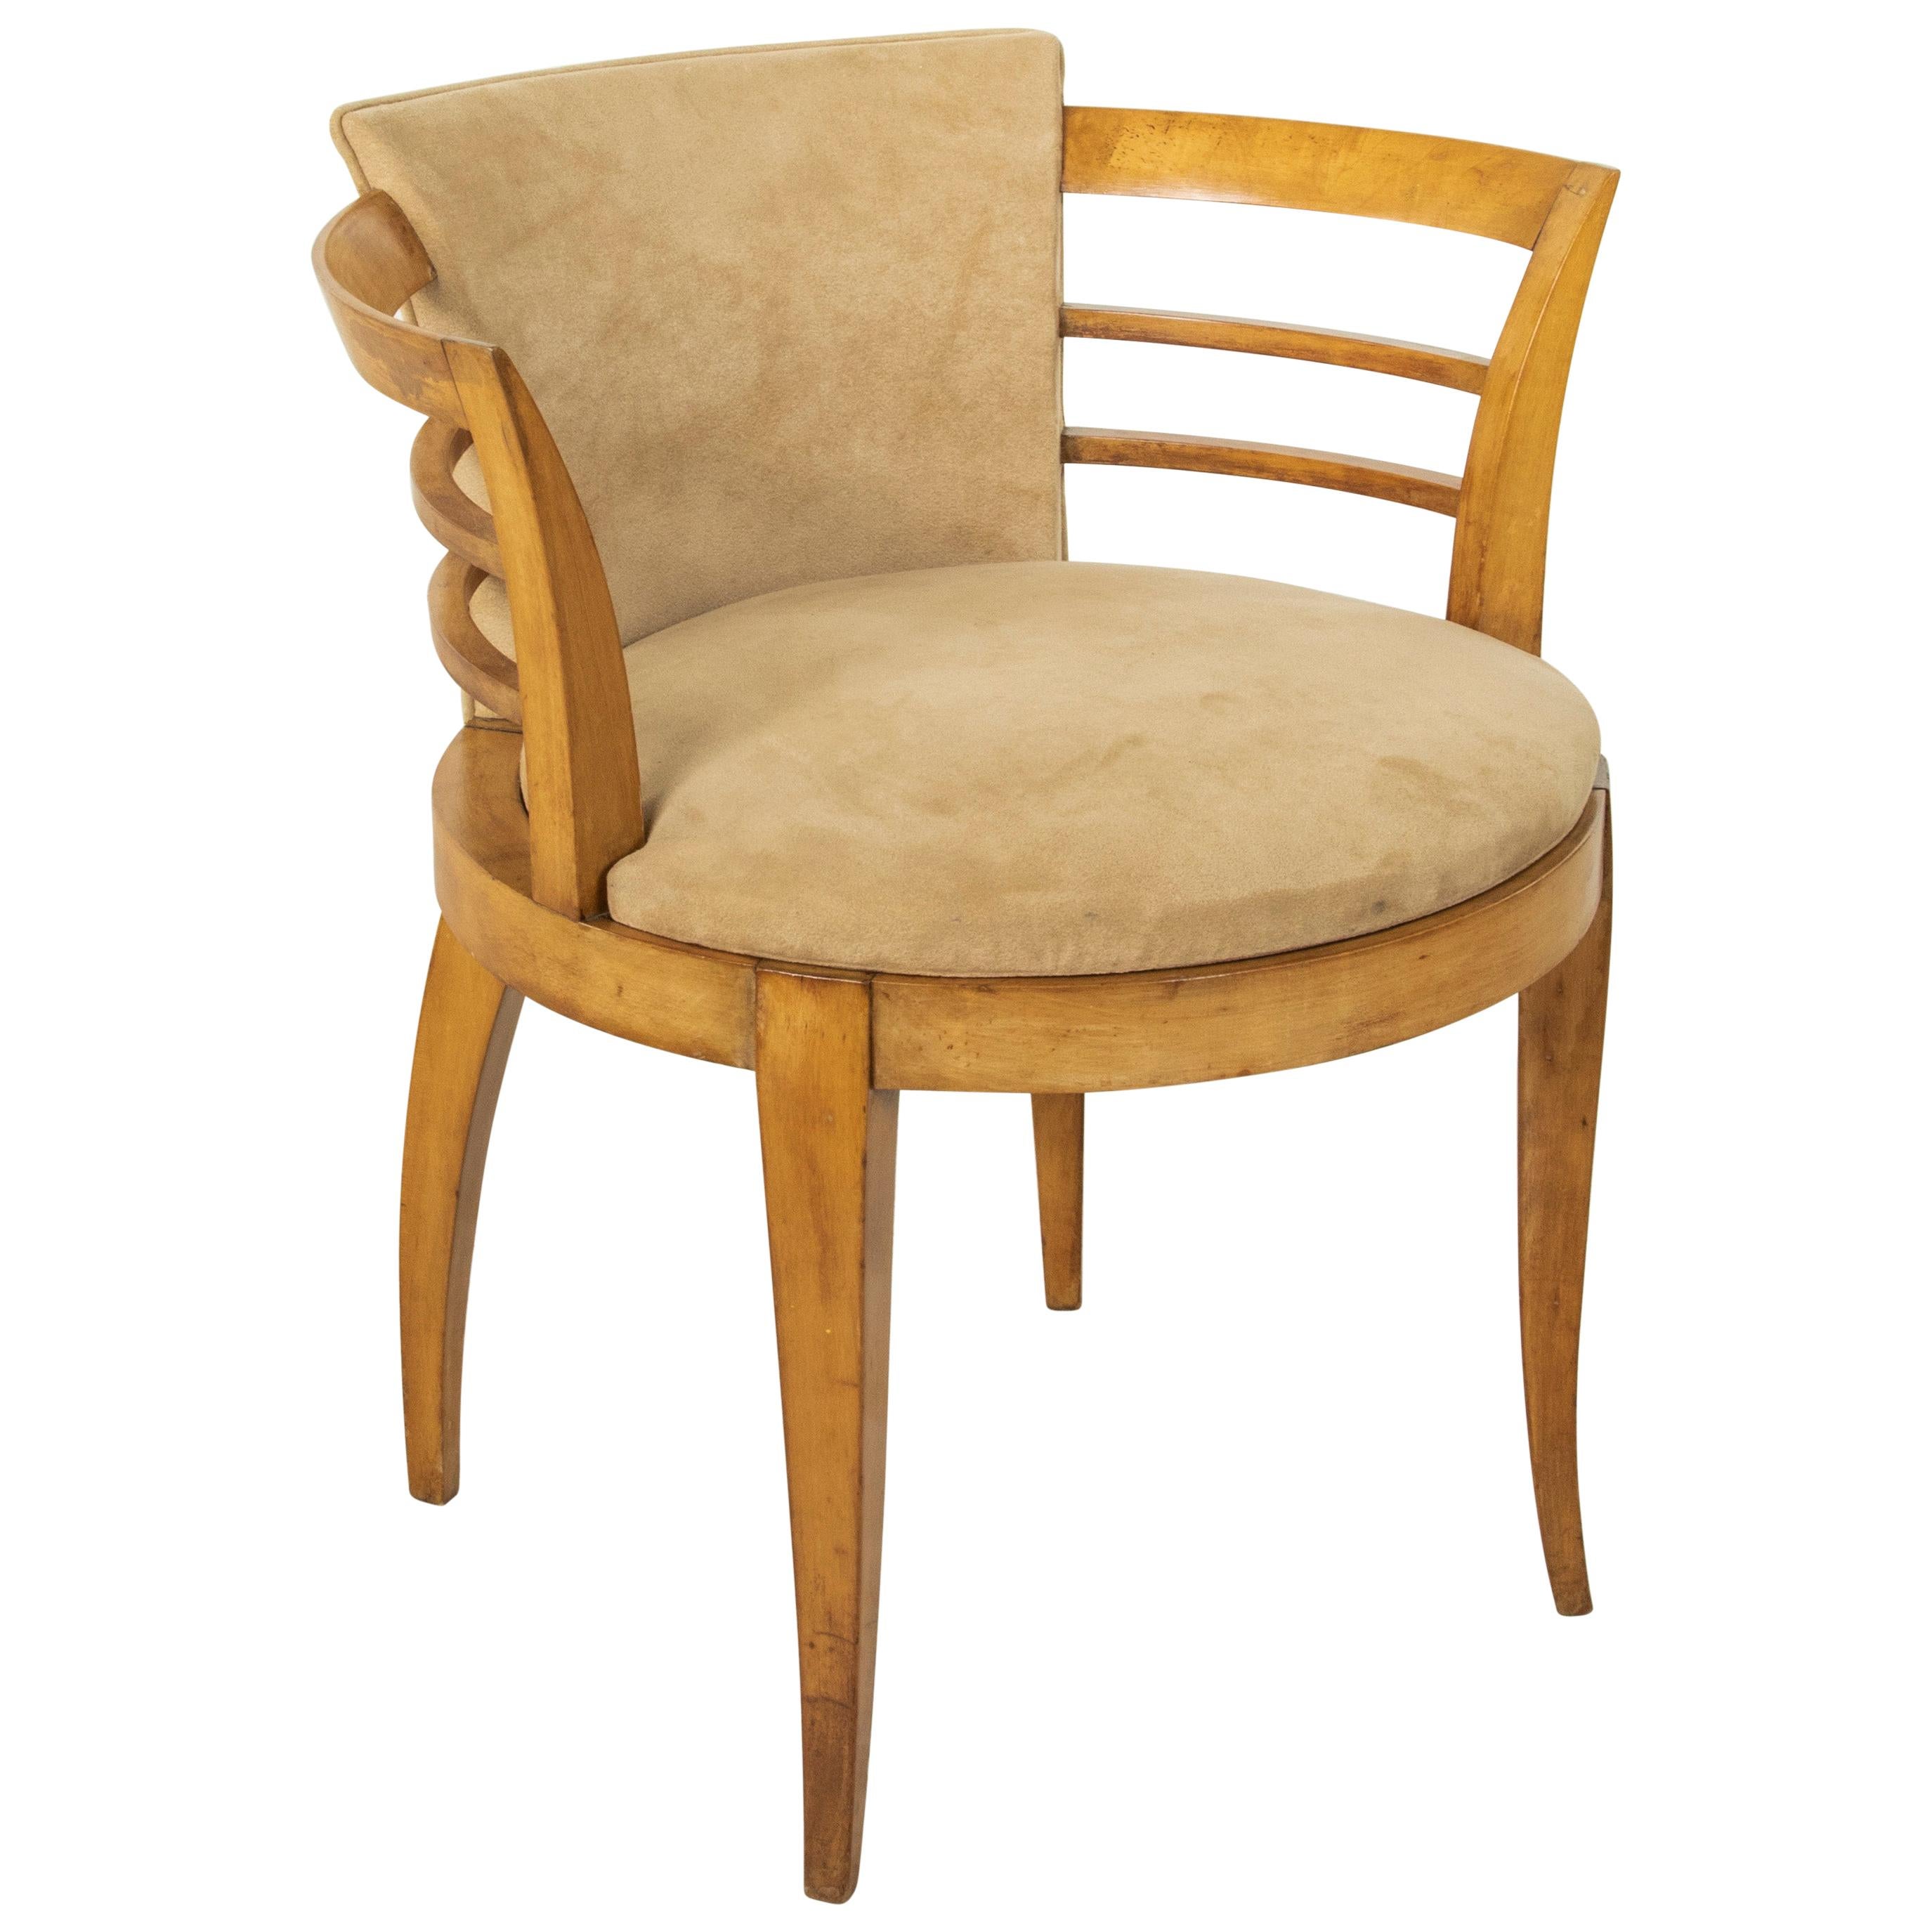 Early 20th Century French Art Deco Period Lemon Wood Armchair or Bergère